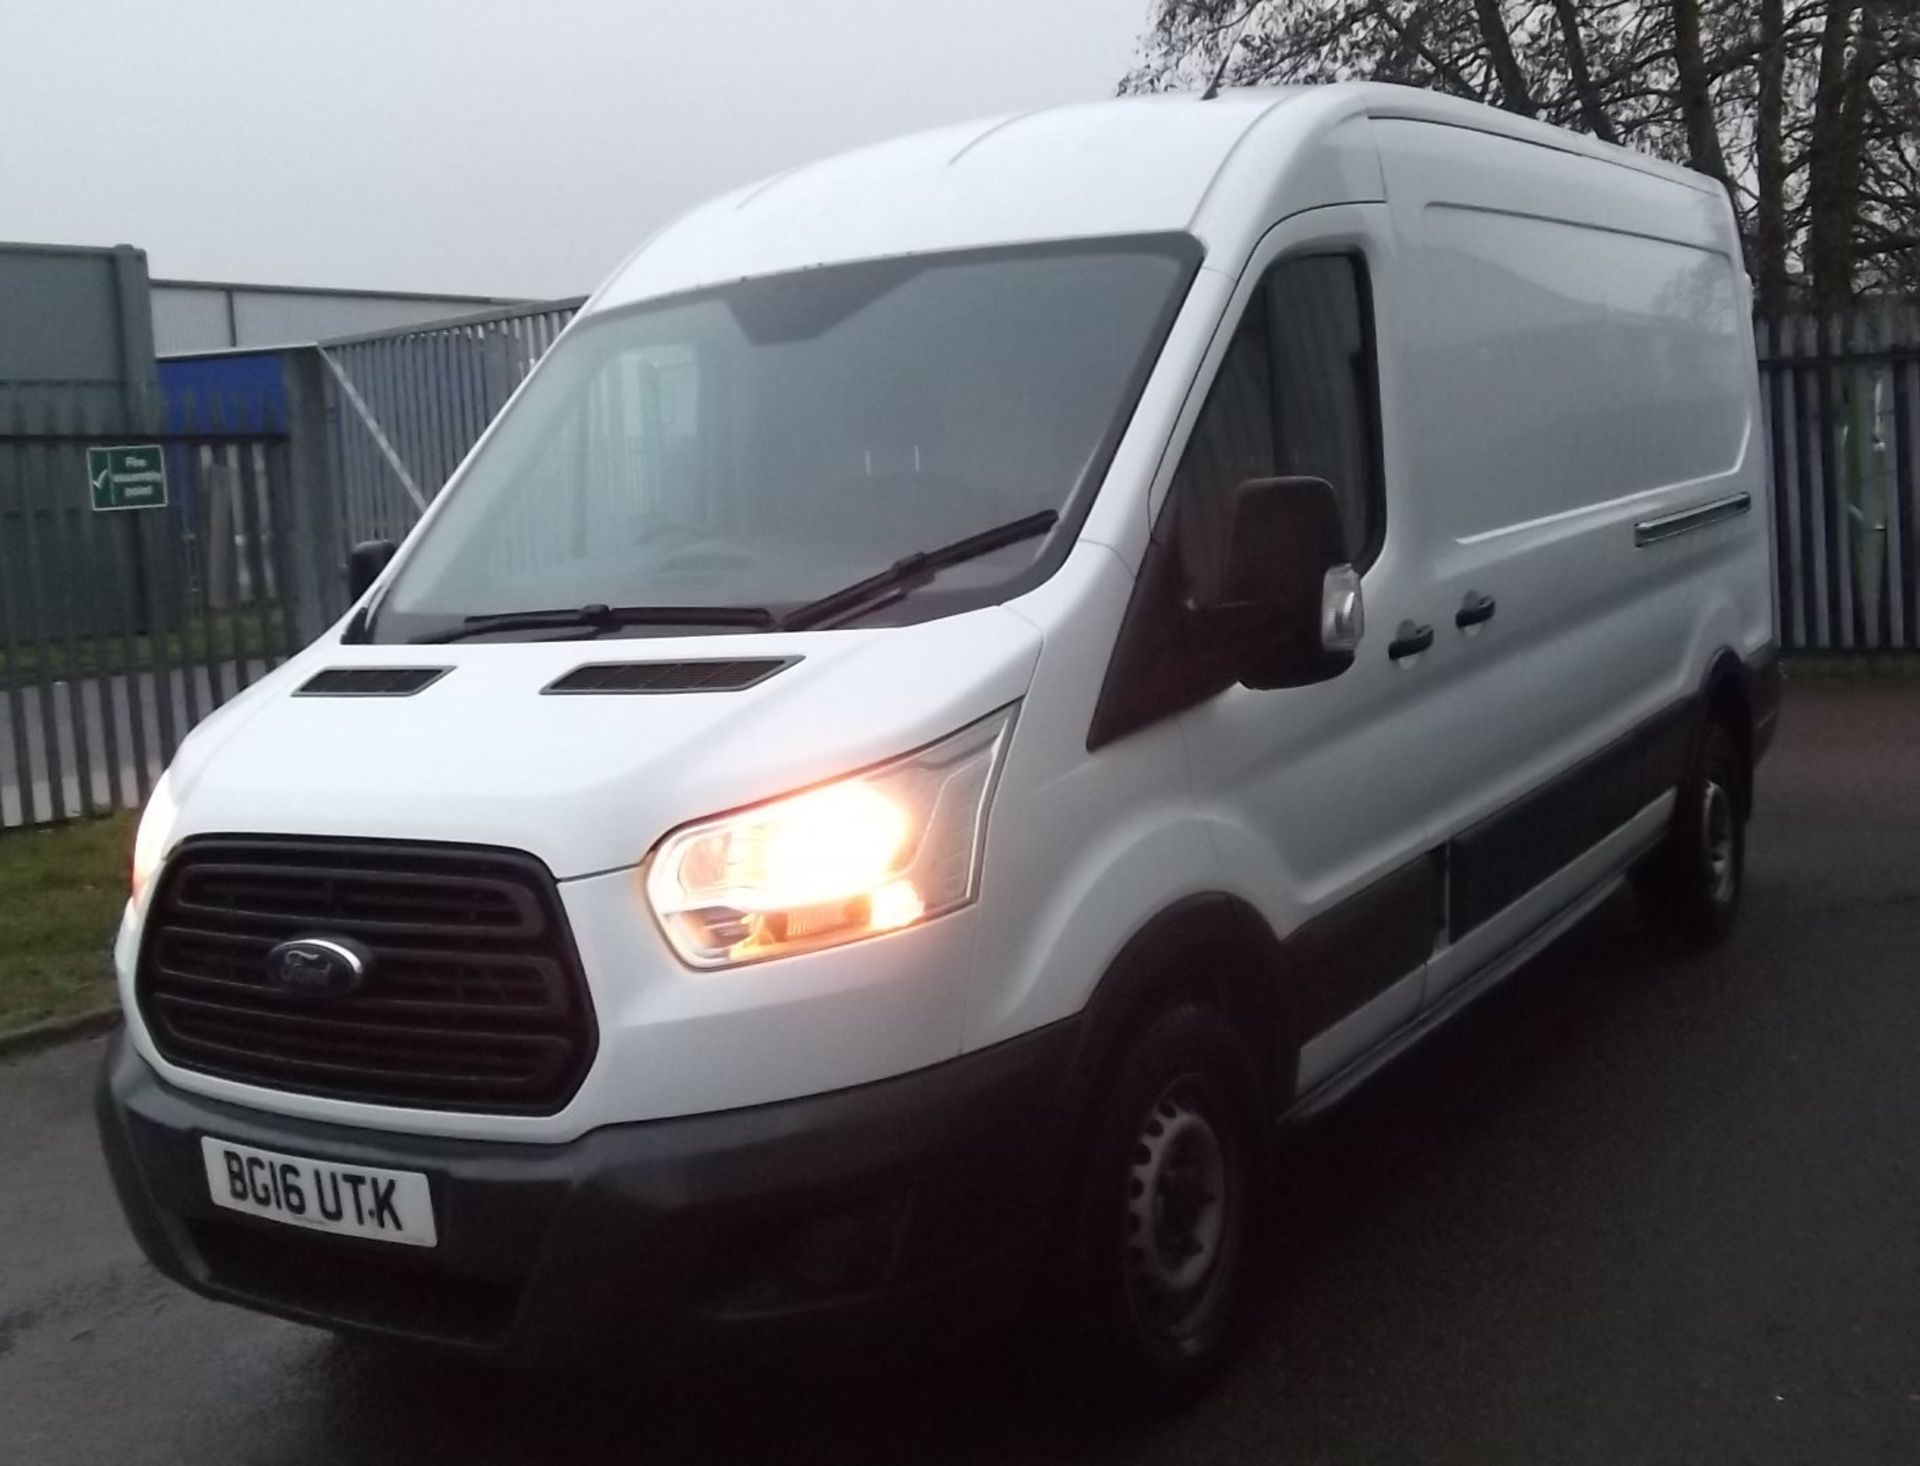 2016 Ford Transit 350 2.2 TDCi 125ps H2 Panel Van - CL505 - Location: Corby, Northamptonshire - Image 7 of 15